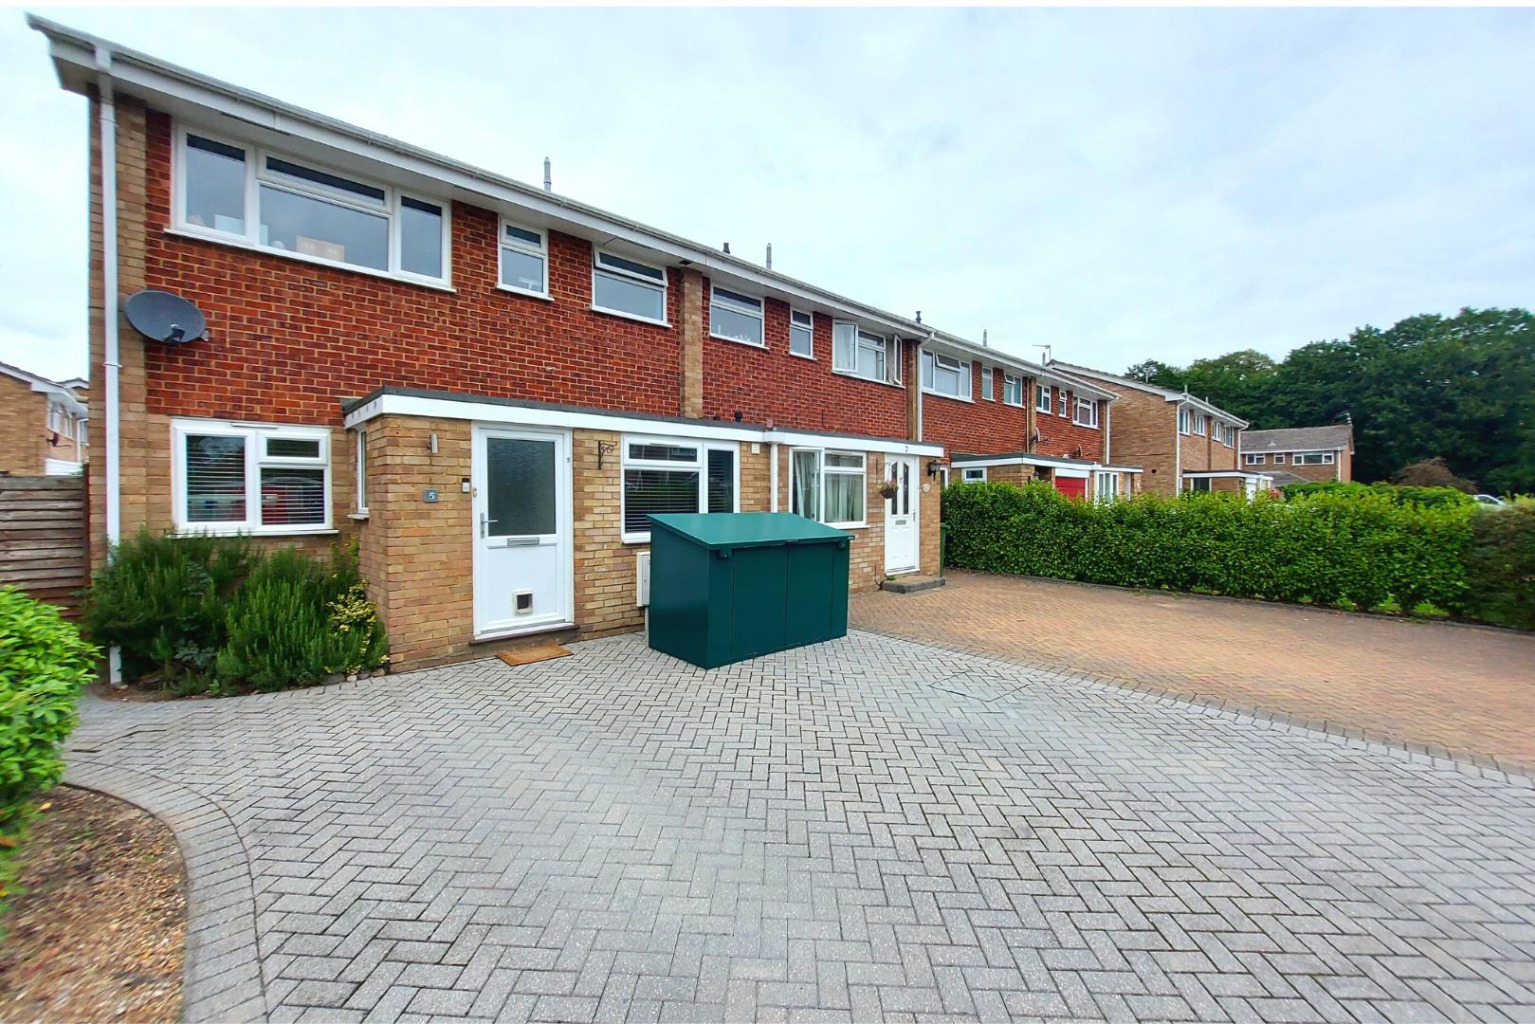 This three bedroom family home offers spacious and generous living accommodation. The property is situated in a cul de sac in the highly sought after Avenue Farm development.  Downstairs offers flexible family living space, coupled with the added bonus of a study and cloakroom.